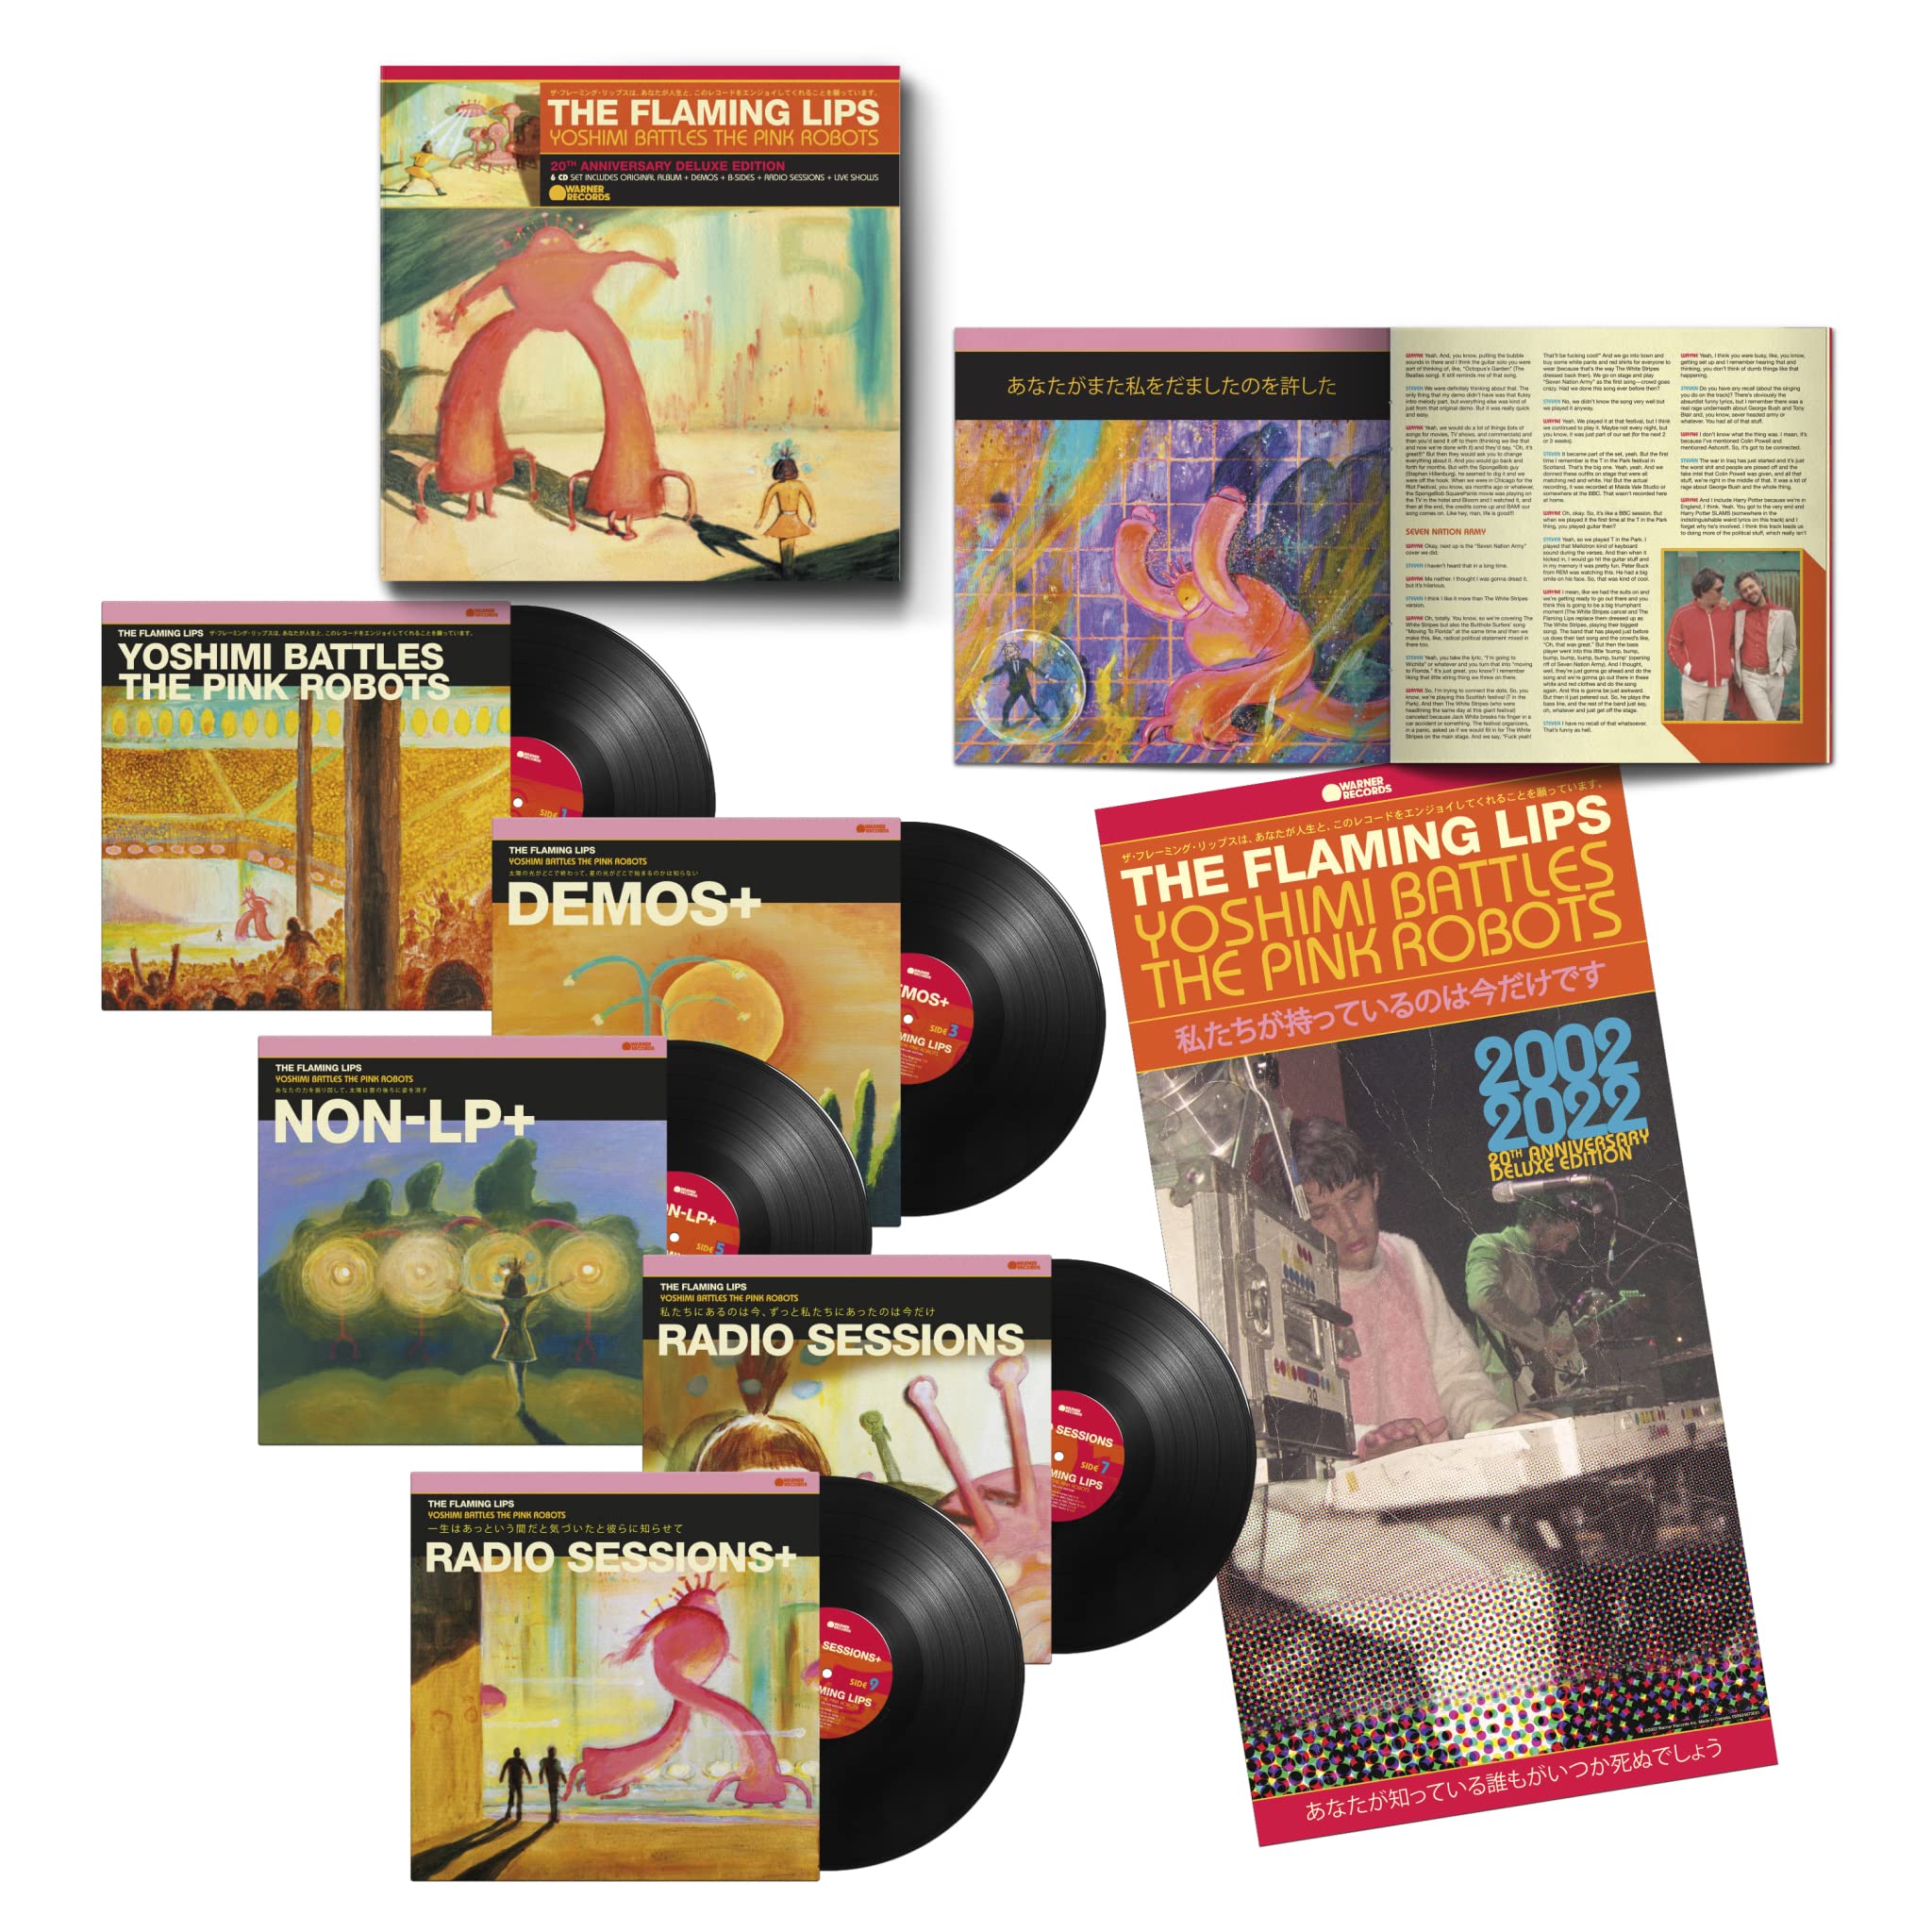 YOSHIMI BATTLES THE PINK ROBOTS (20TH ANNIVERSARY SUPER DELUXE EDITION 5LP)